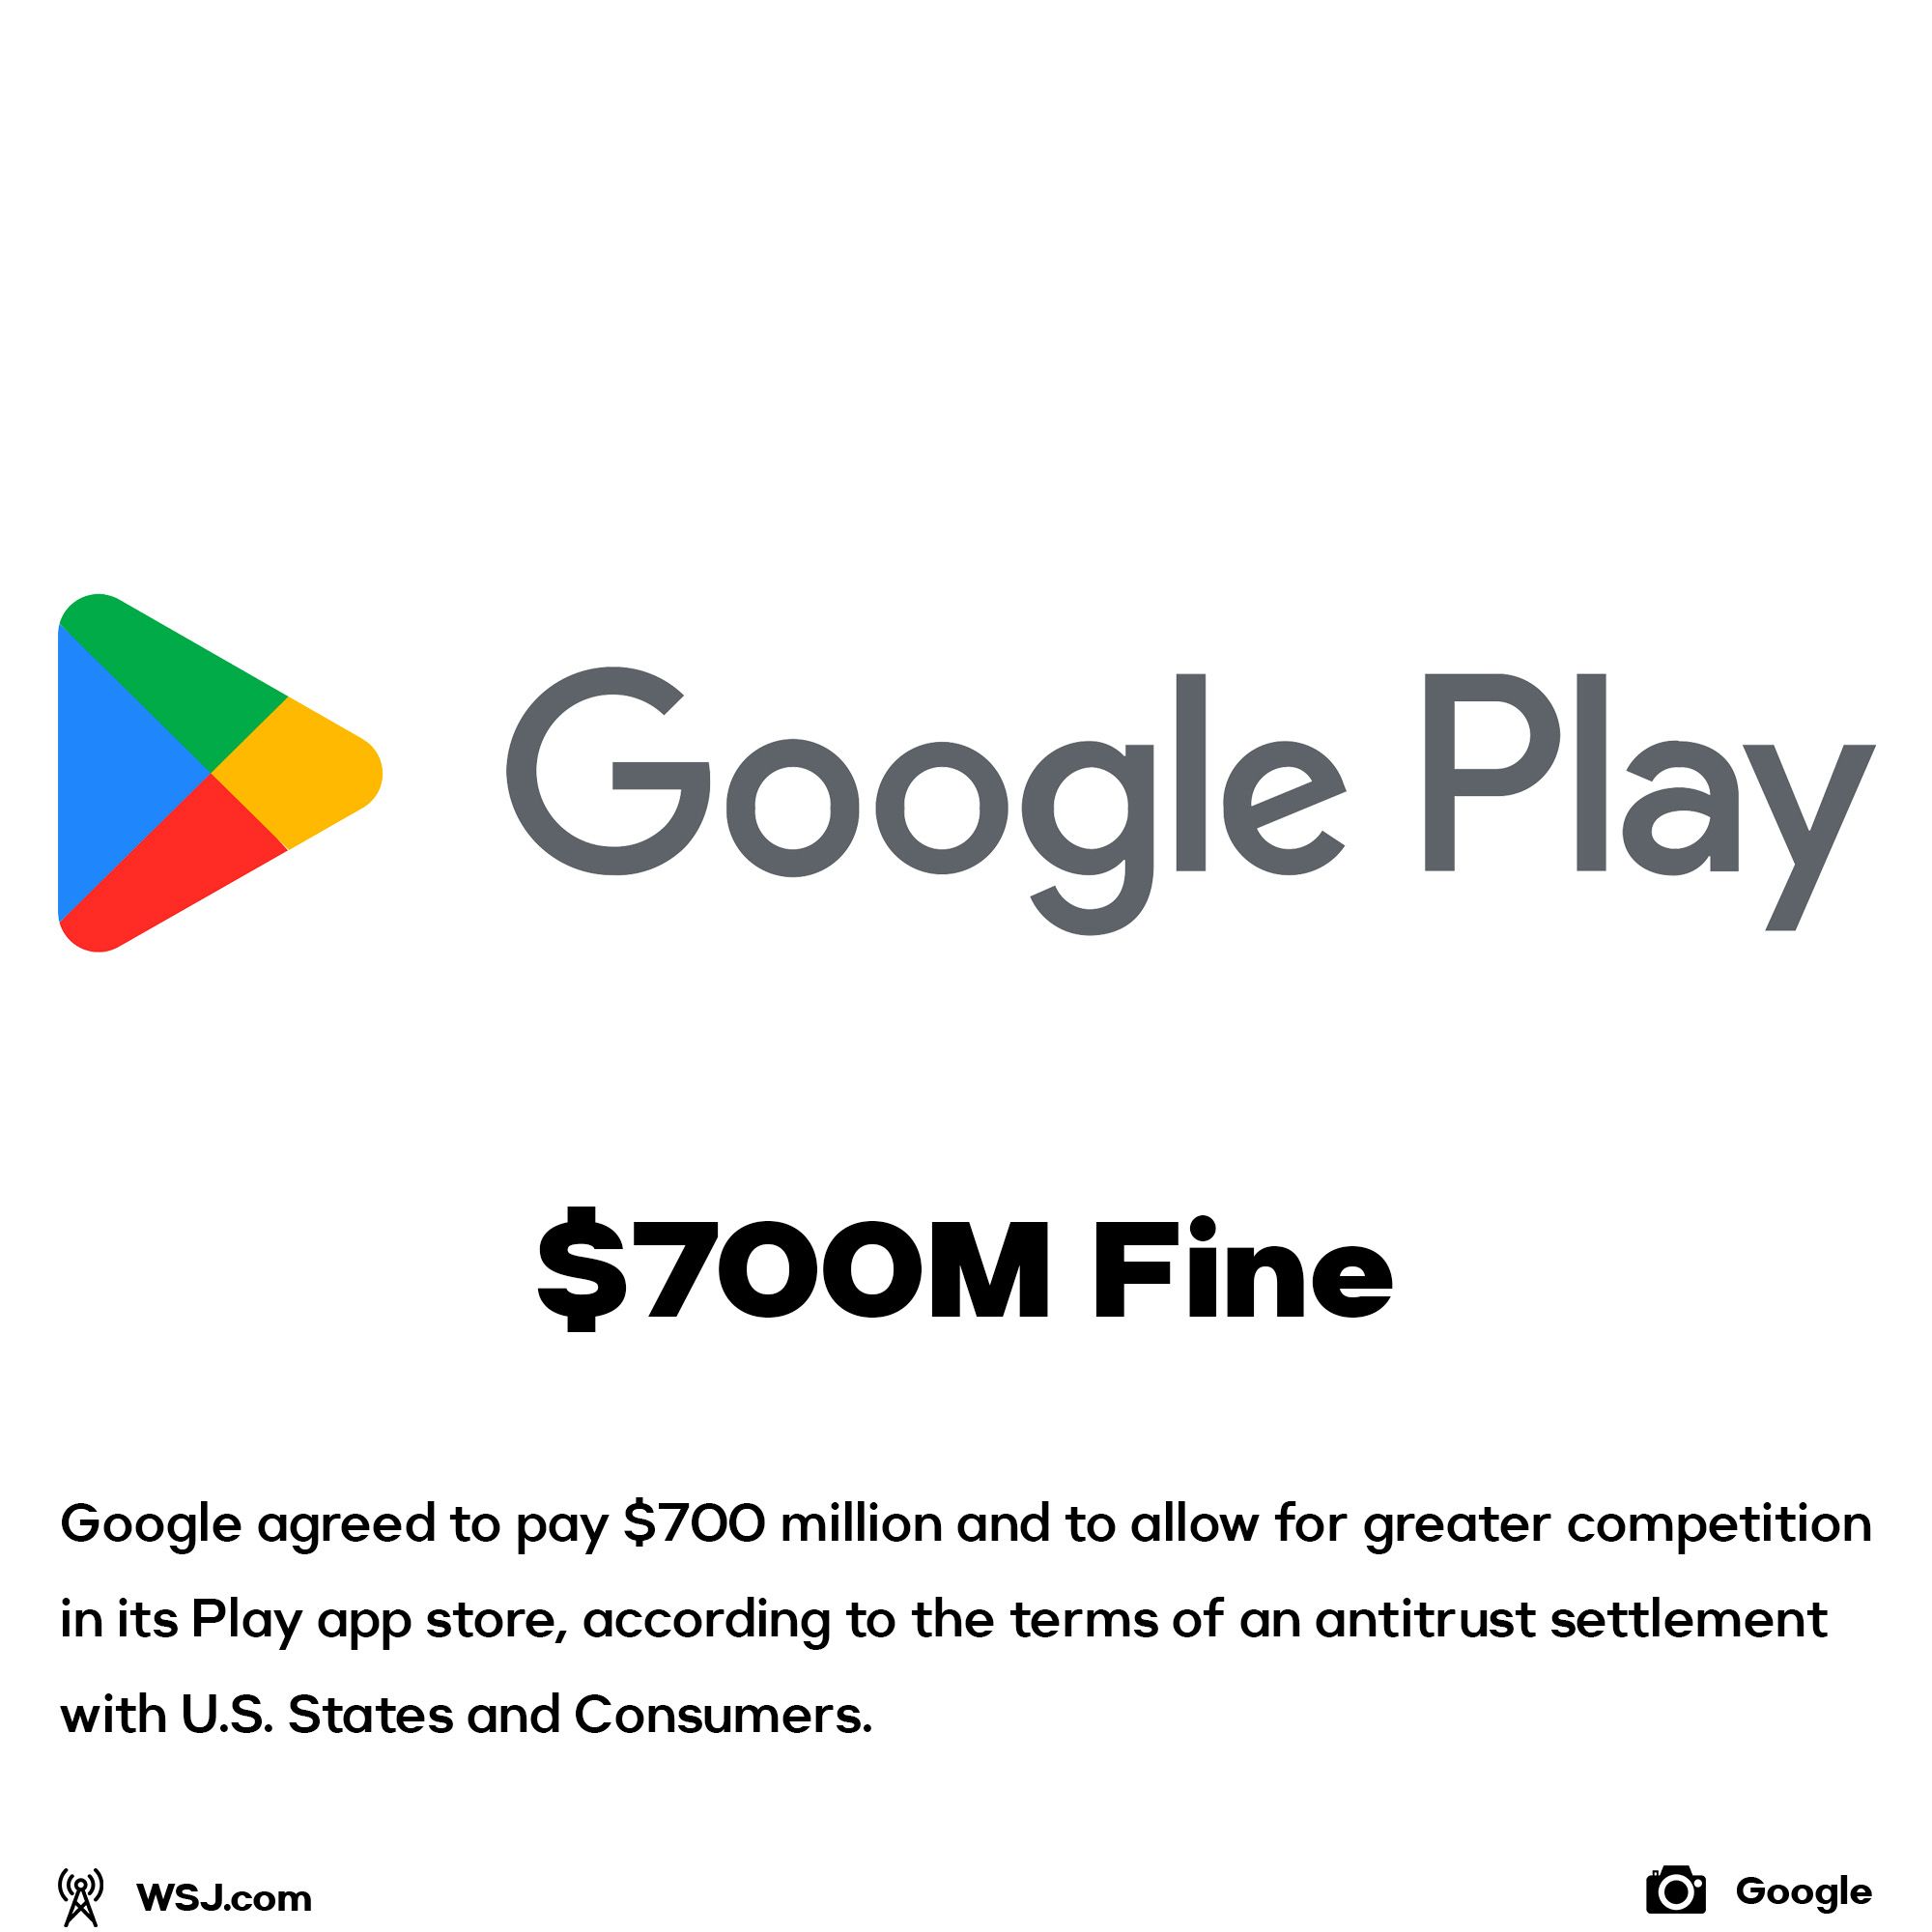 Google Play fined $700M